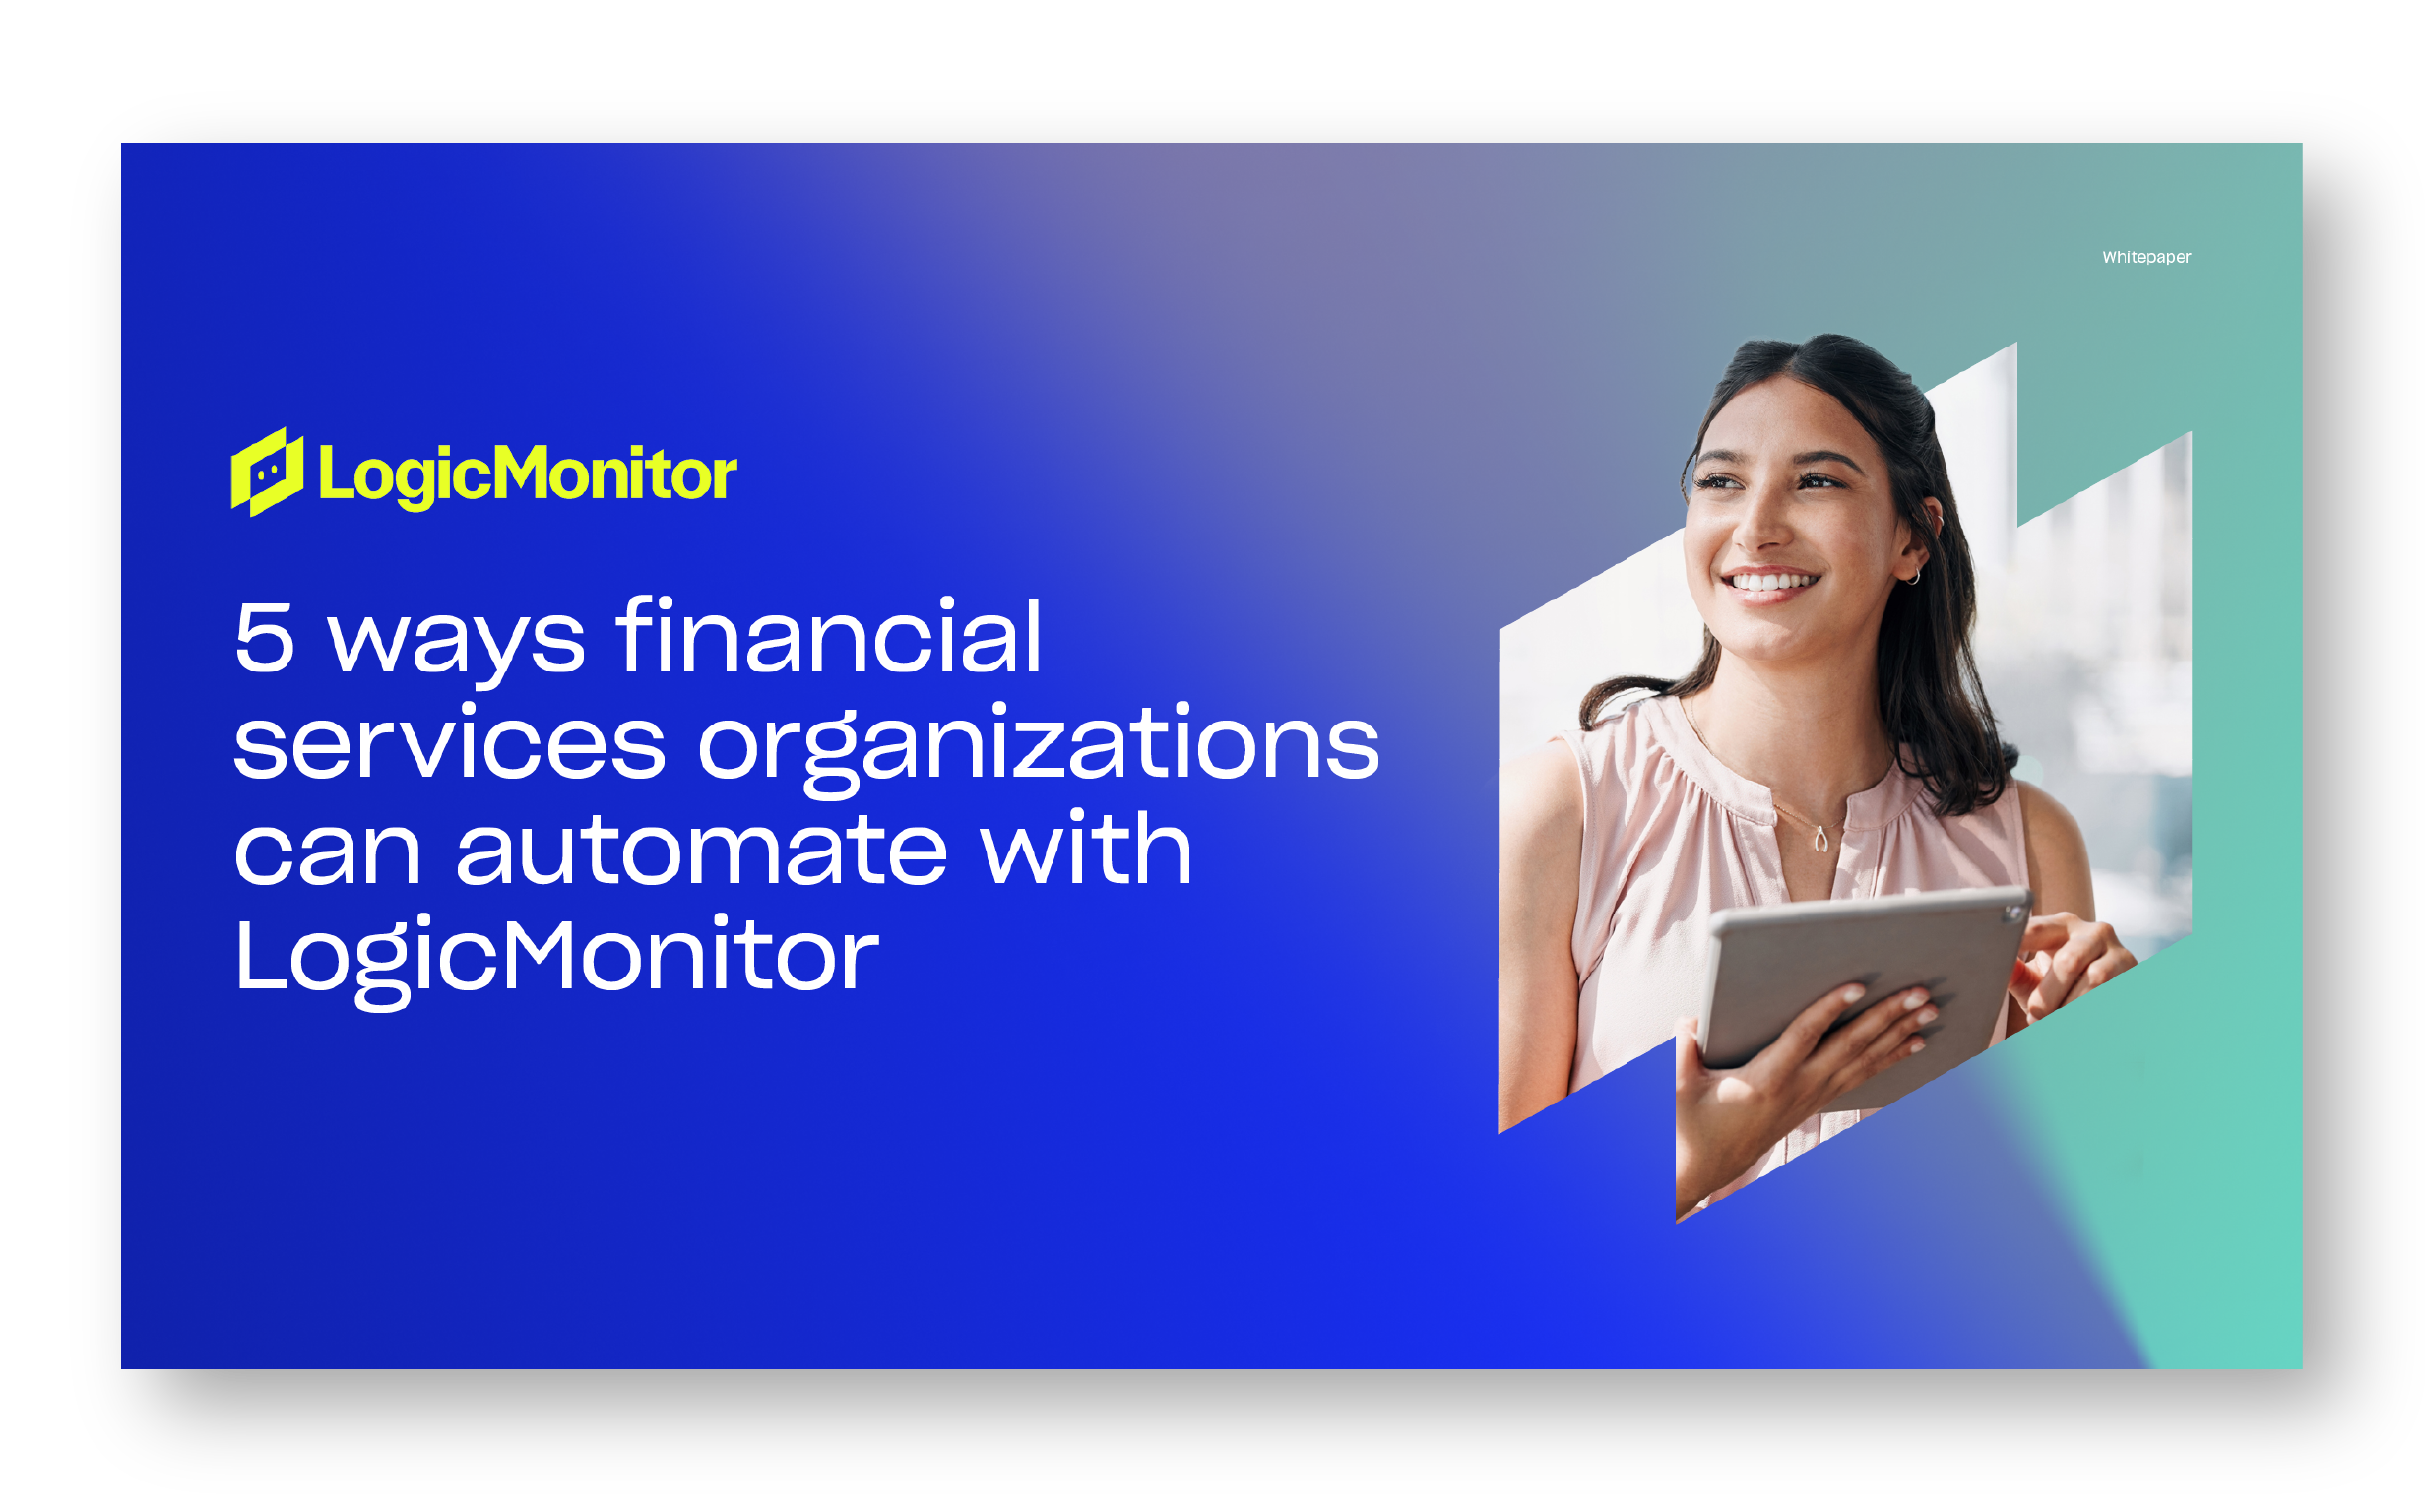 5 ways financial services organizations can automate with LogicMonitor